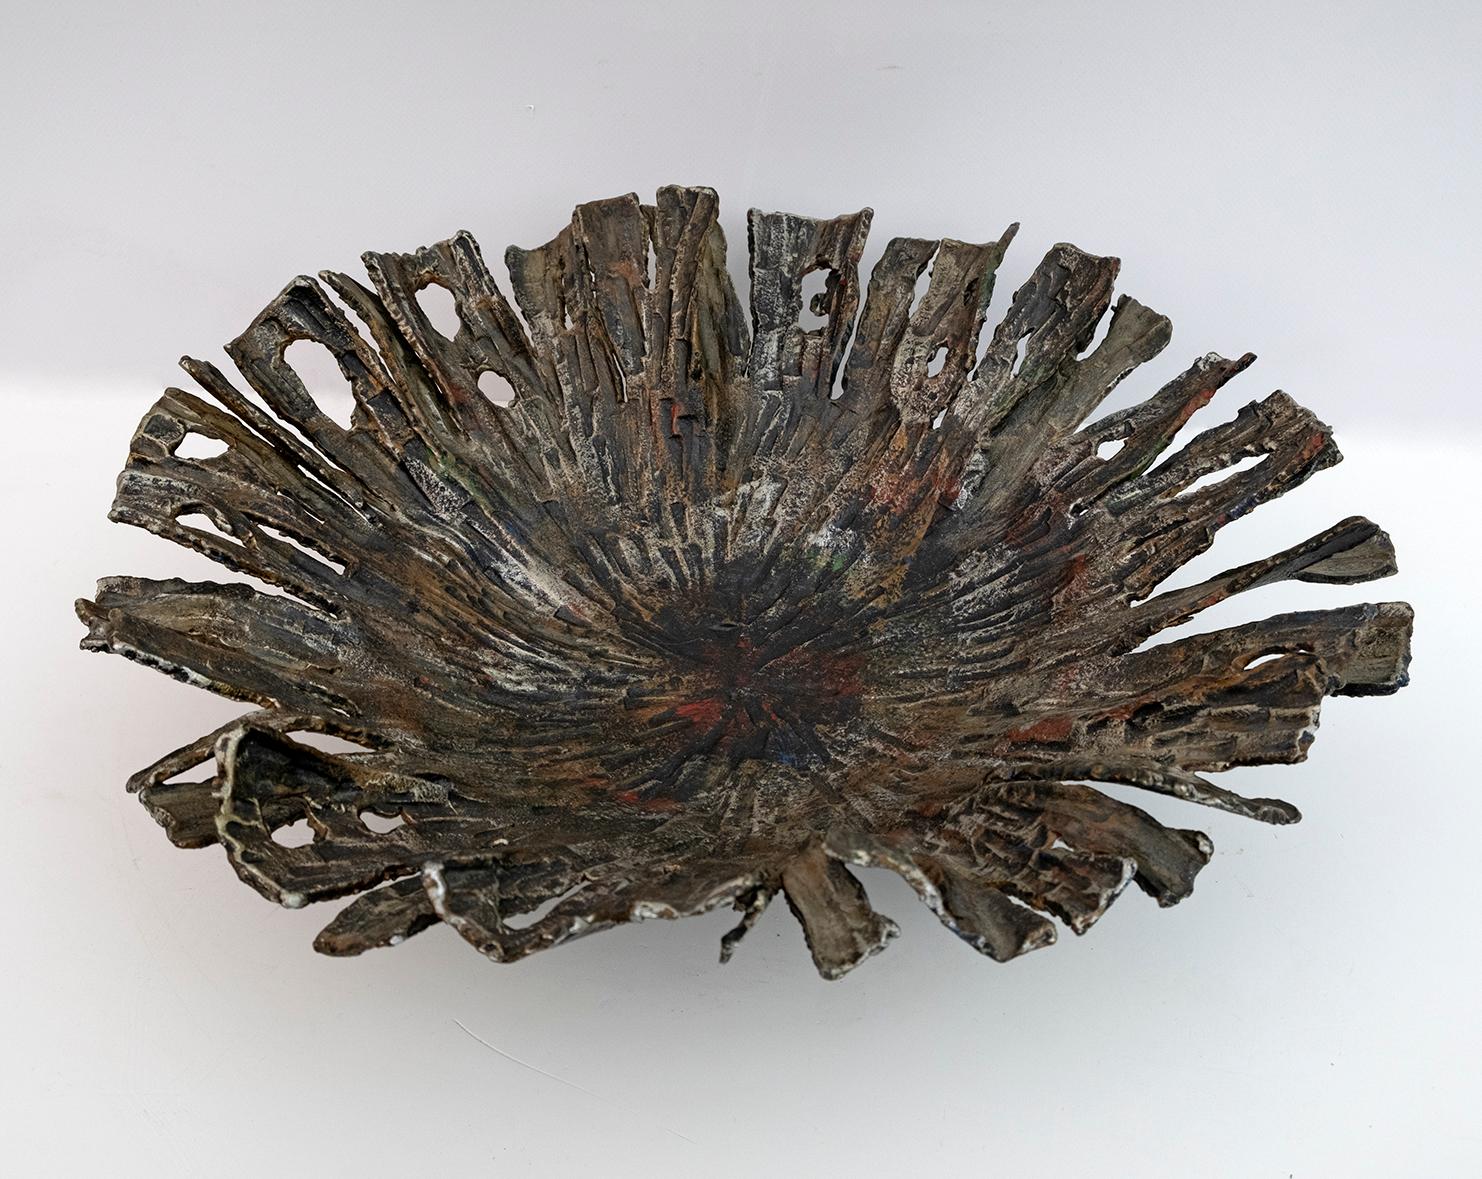 One-of-a-kind round brutalist and sculptural centerpiece, designed and made in Italy in the 1970s by the Italian sculptor Salvino Marsura.
In hand-forged iron, silver patinated with camouflage touches.
This artistic centerpiece is signed by the